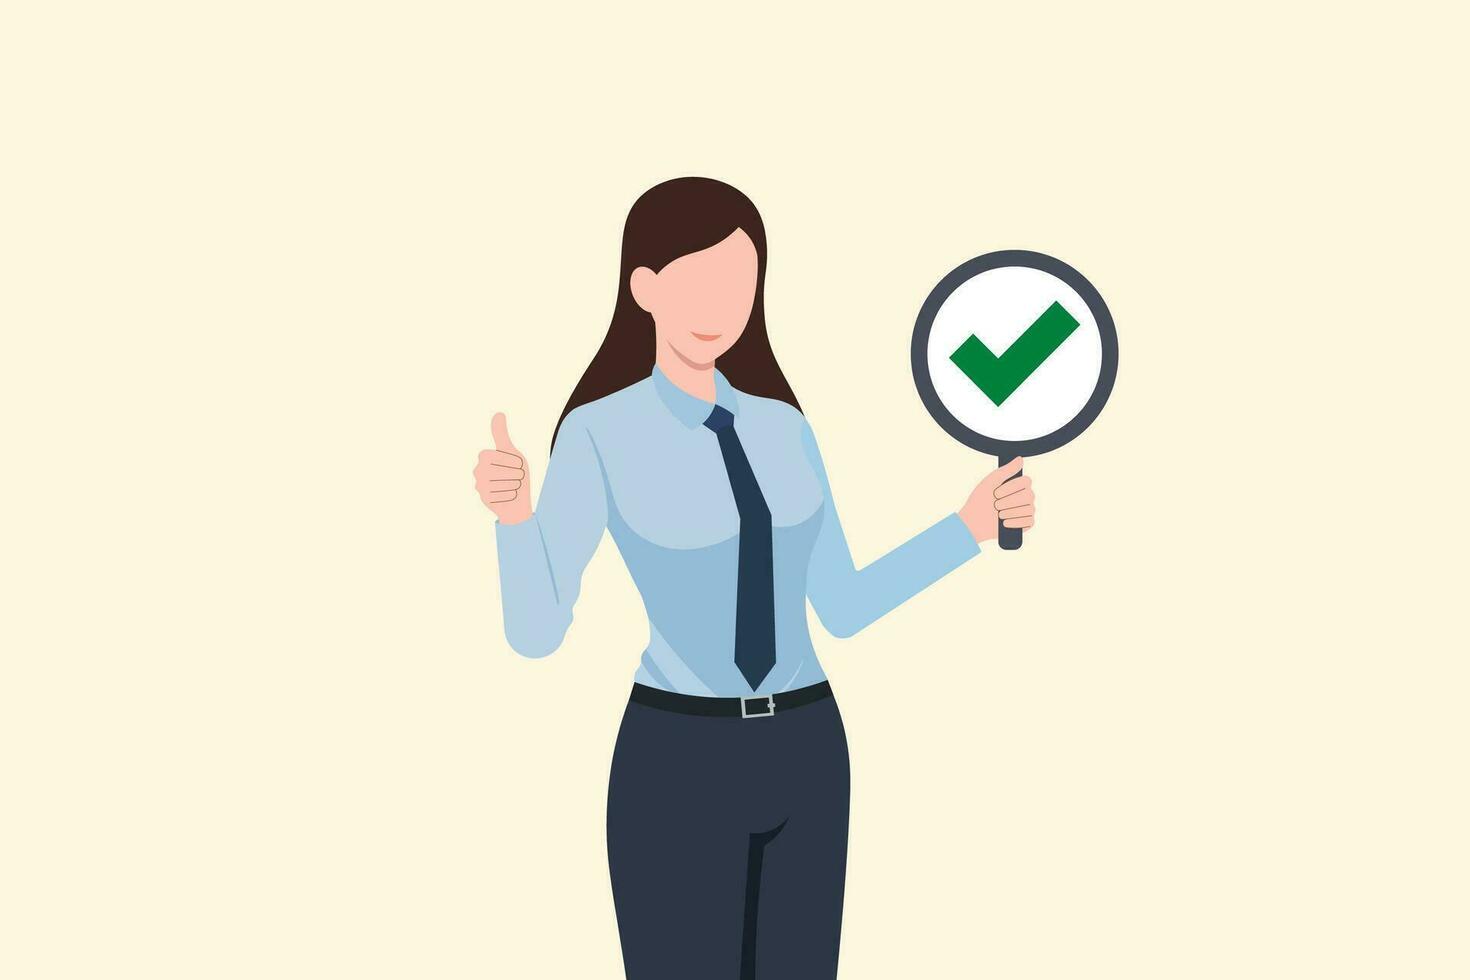 verification and approval of the business choice. business woman showing checkmark correct. symbol icon Green Checkmark button. business vector illustration.